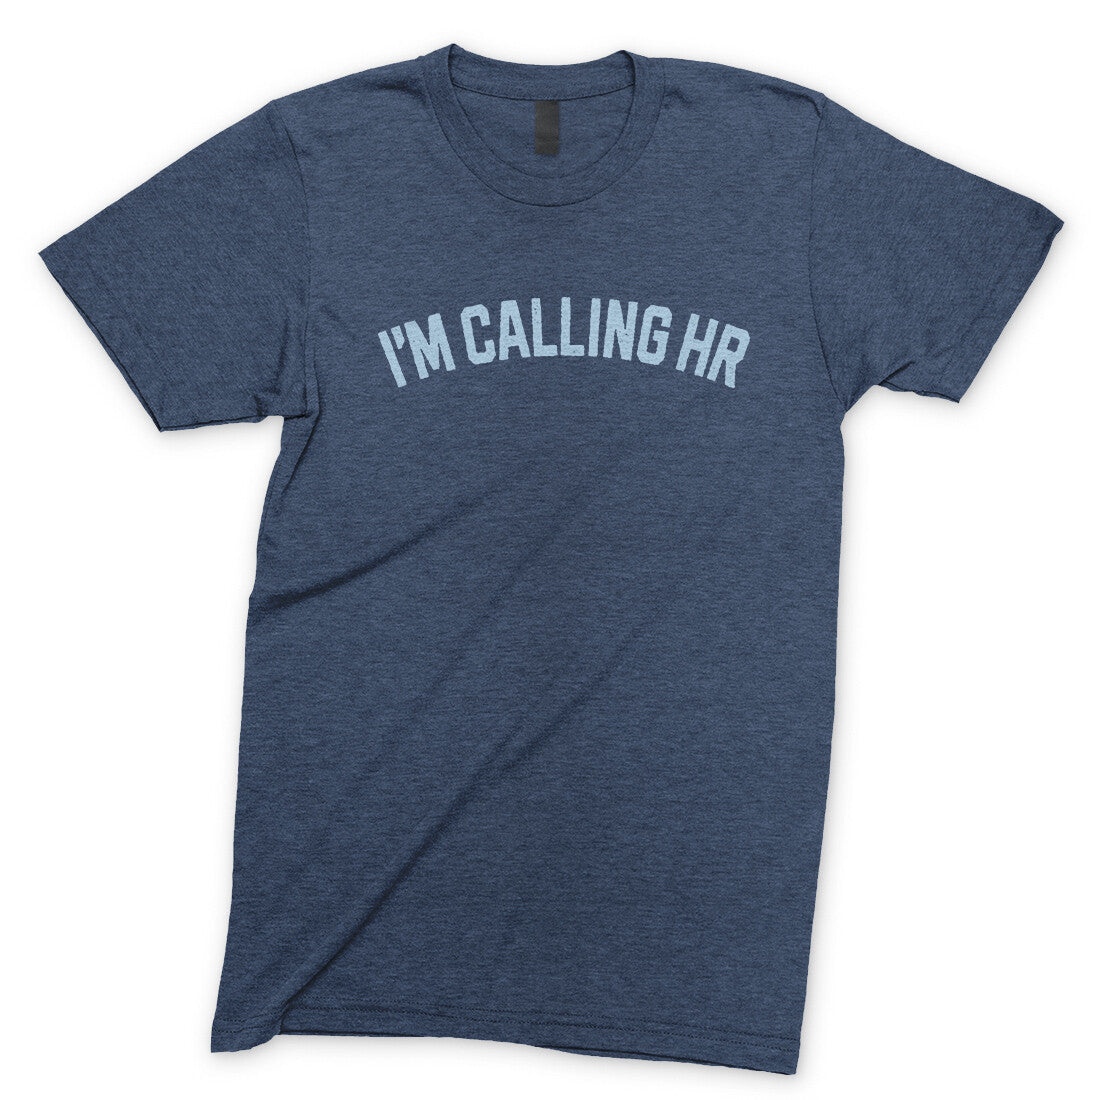 I'm Calling HR in Navy Heather Color